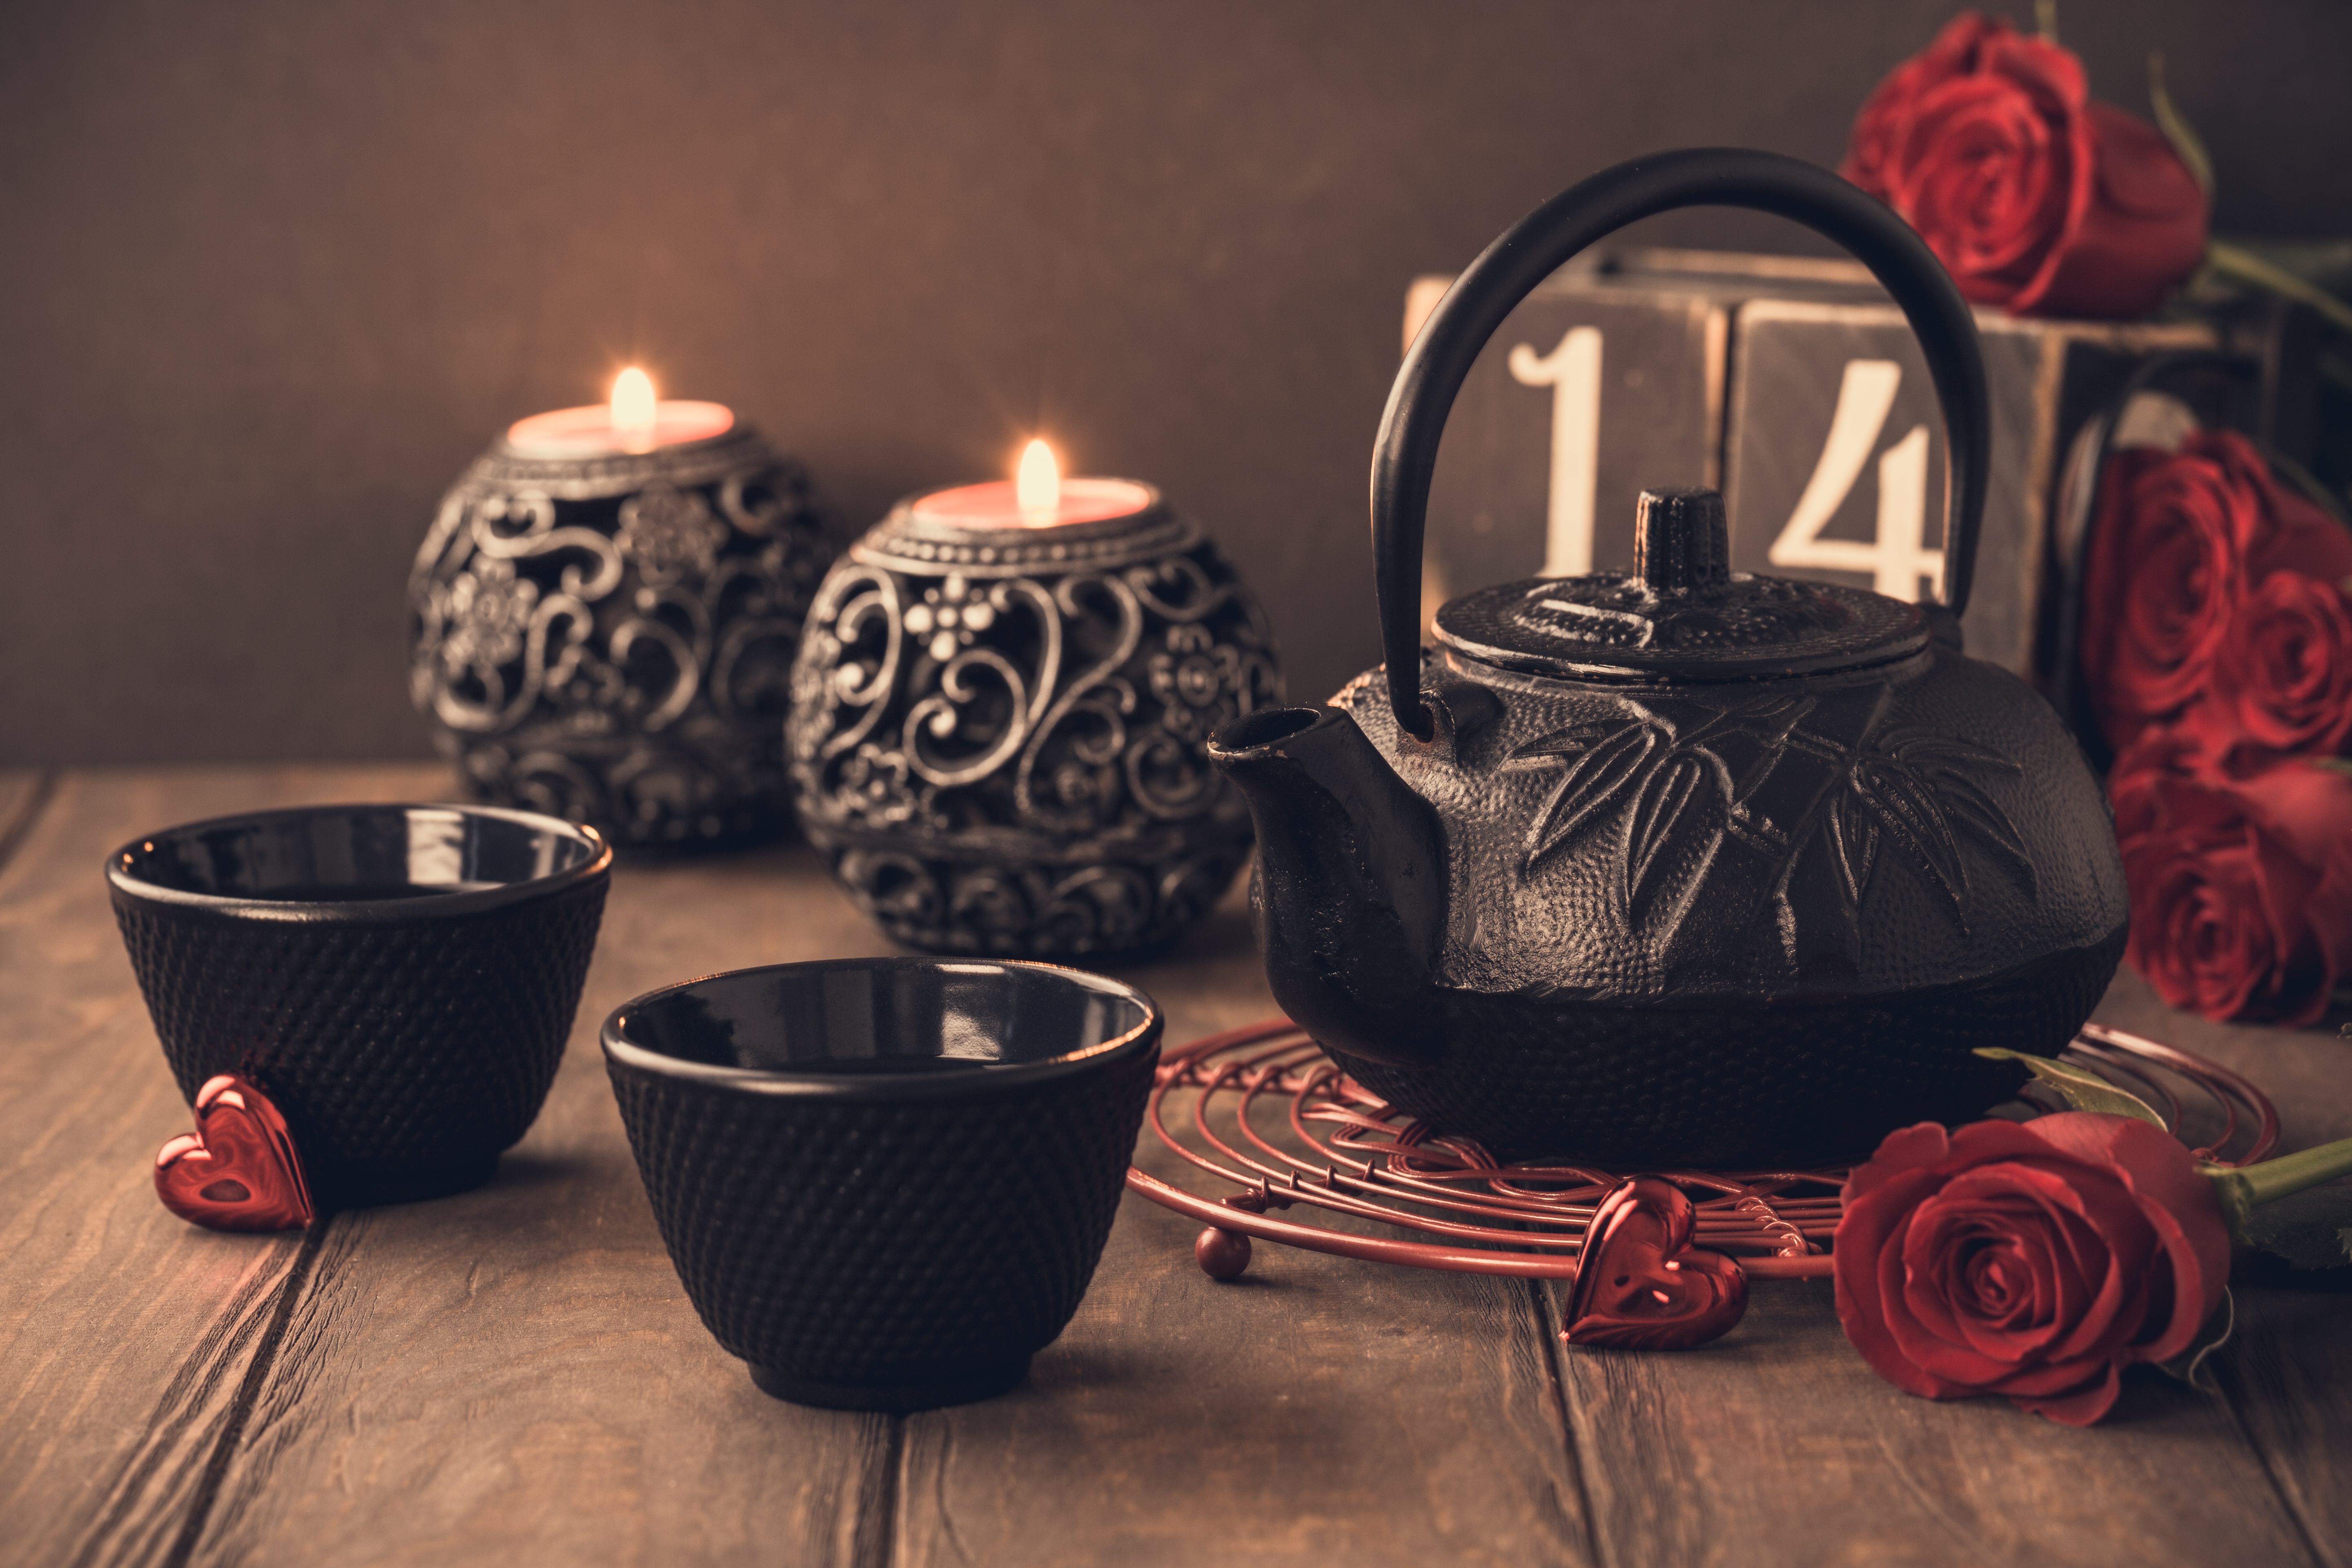 kettle, holiday, valentine's day, candle, cup, red flower, rose, still life Full HD